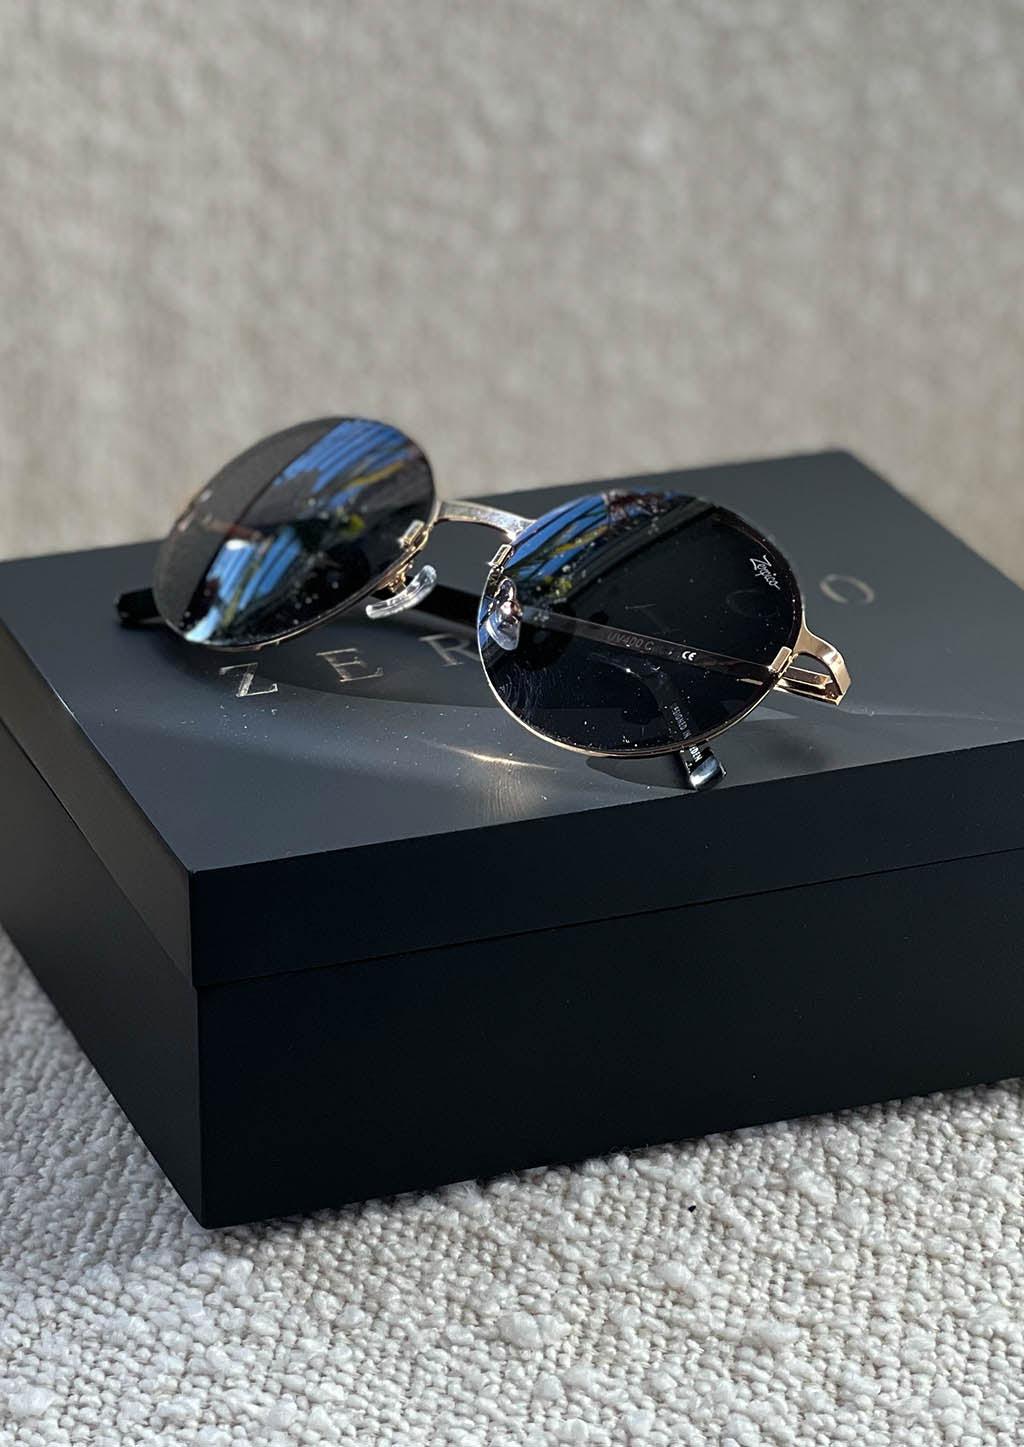 Titan - Titanium Round Sunglasses V2 - 24K Gold Plated with real gold. Closeup with the box.